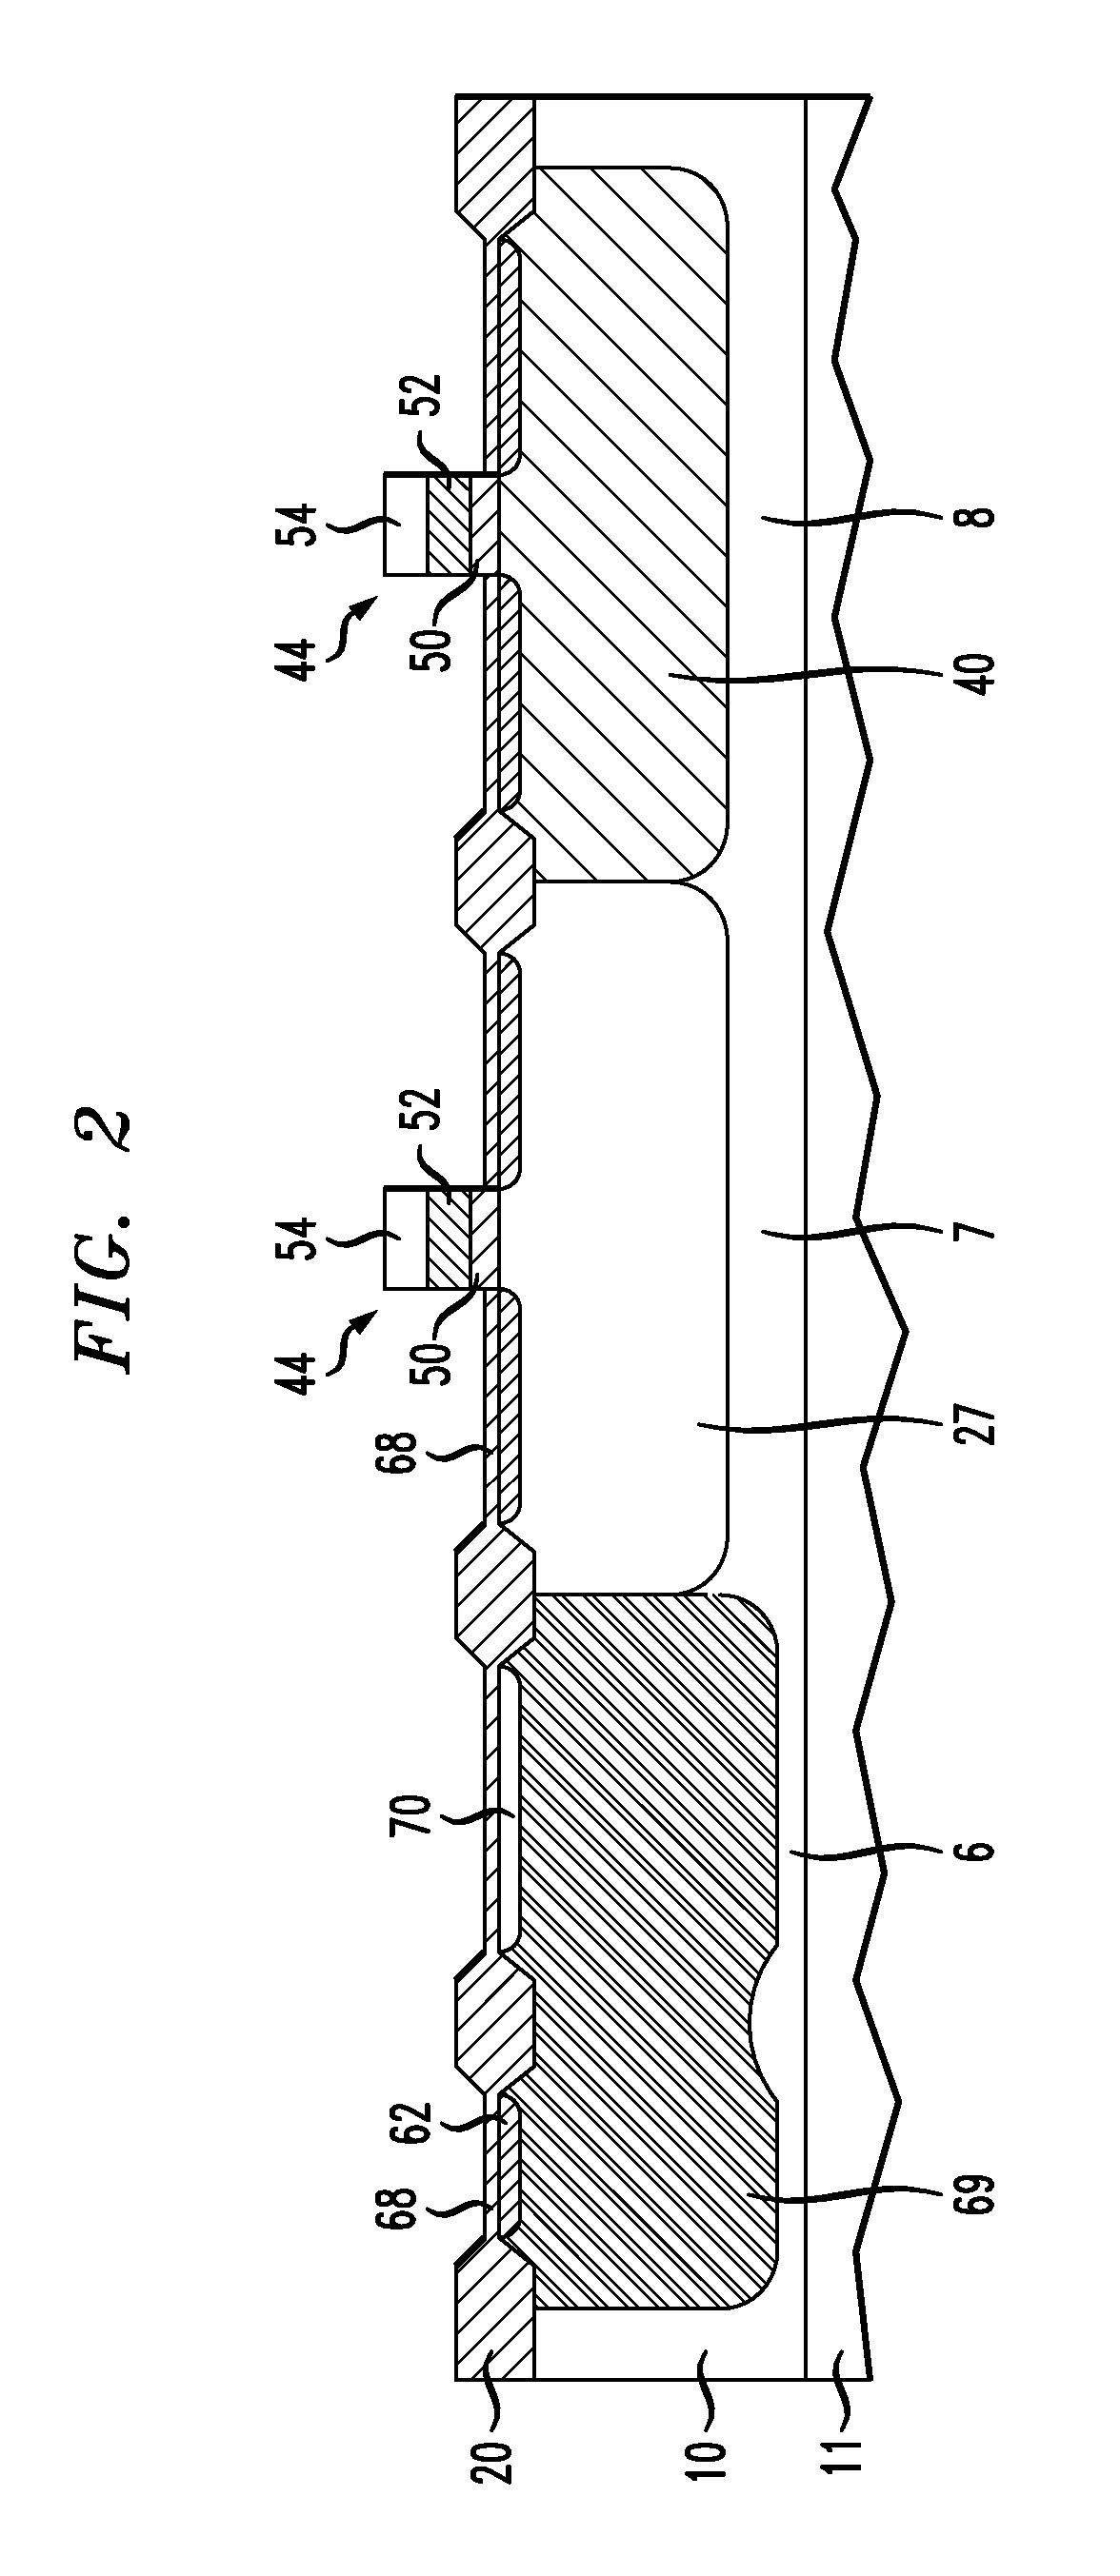 Thermally stable BiCMOS fabrication method and bipolar junction transistors formed according to the method